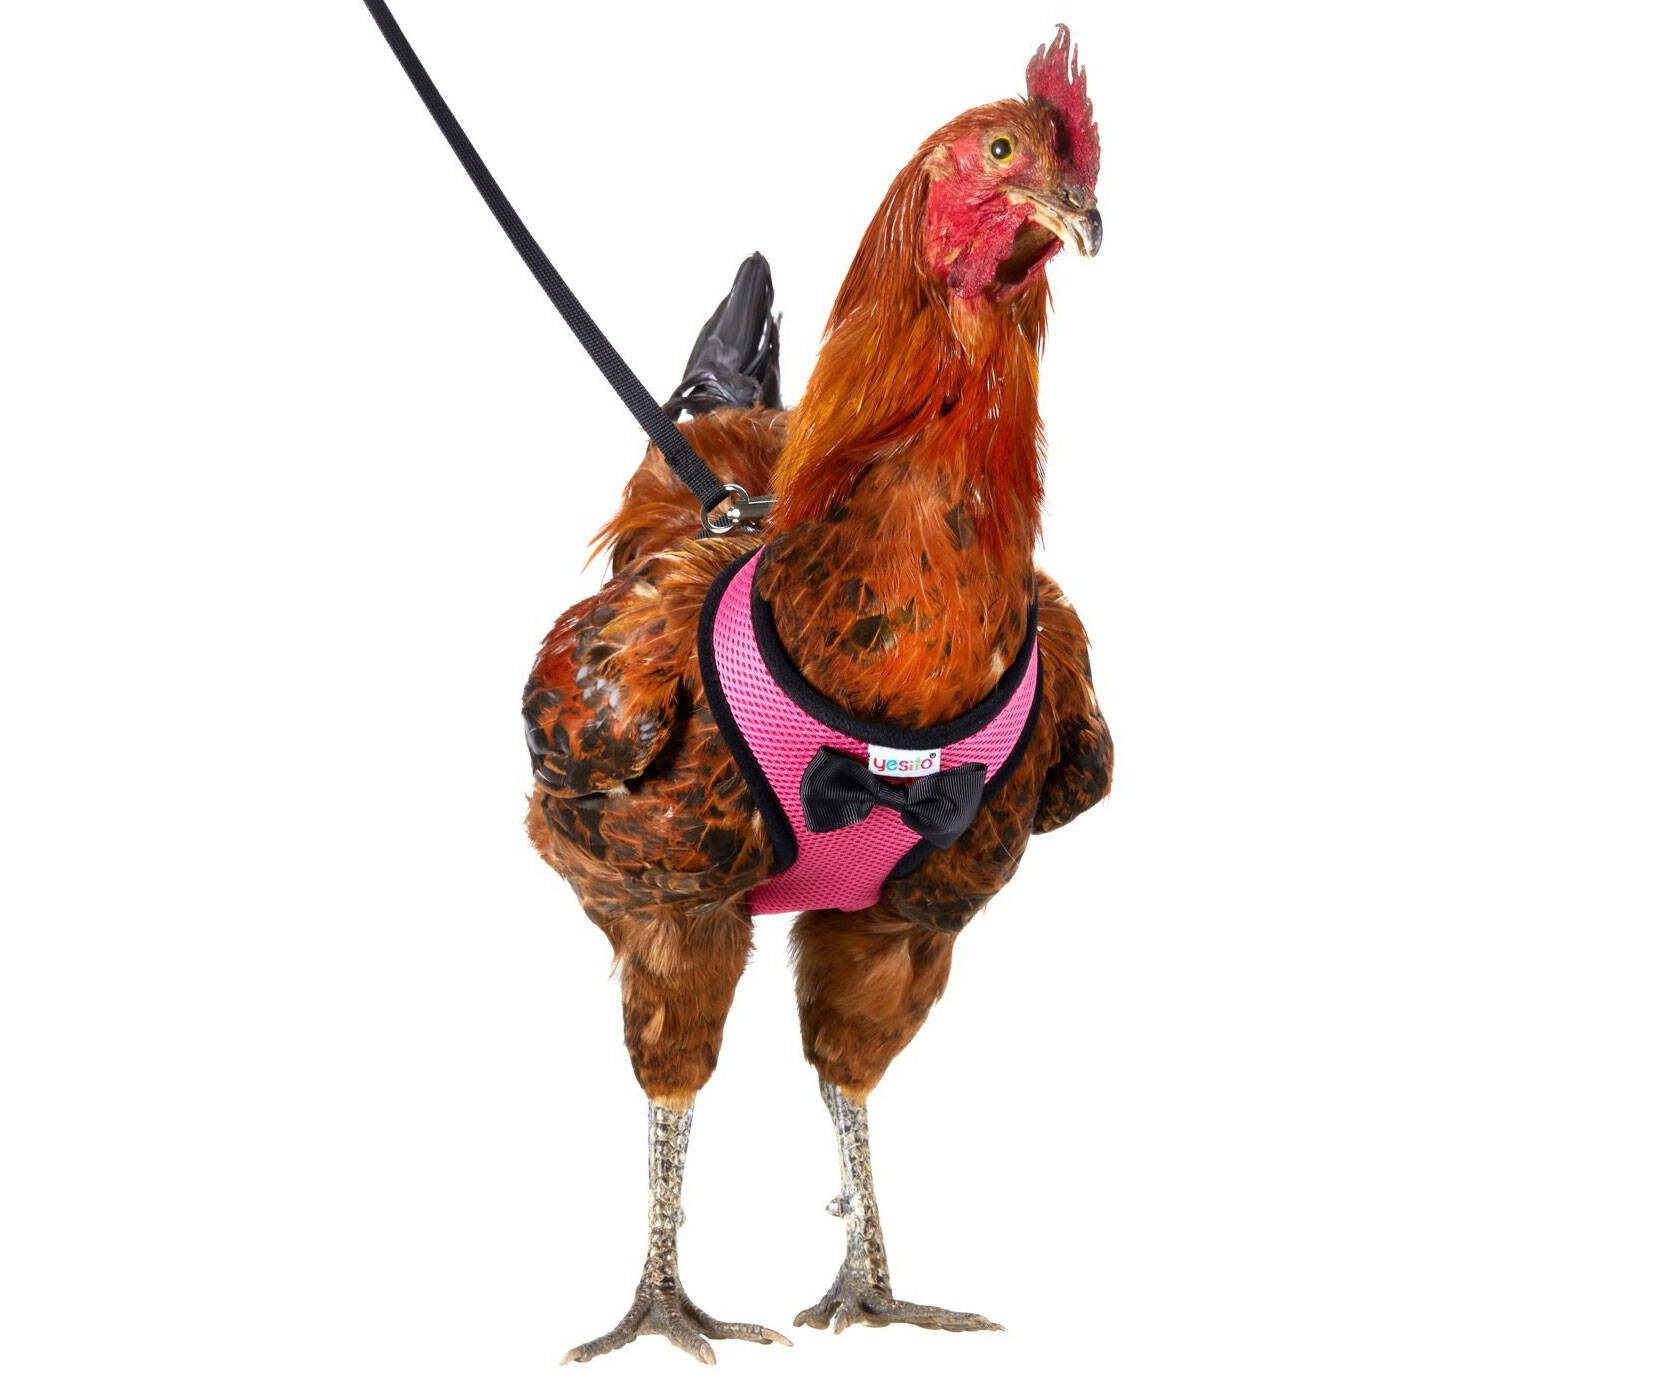 Chicken Harness And Leash - //coolthings.us